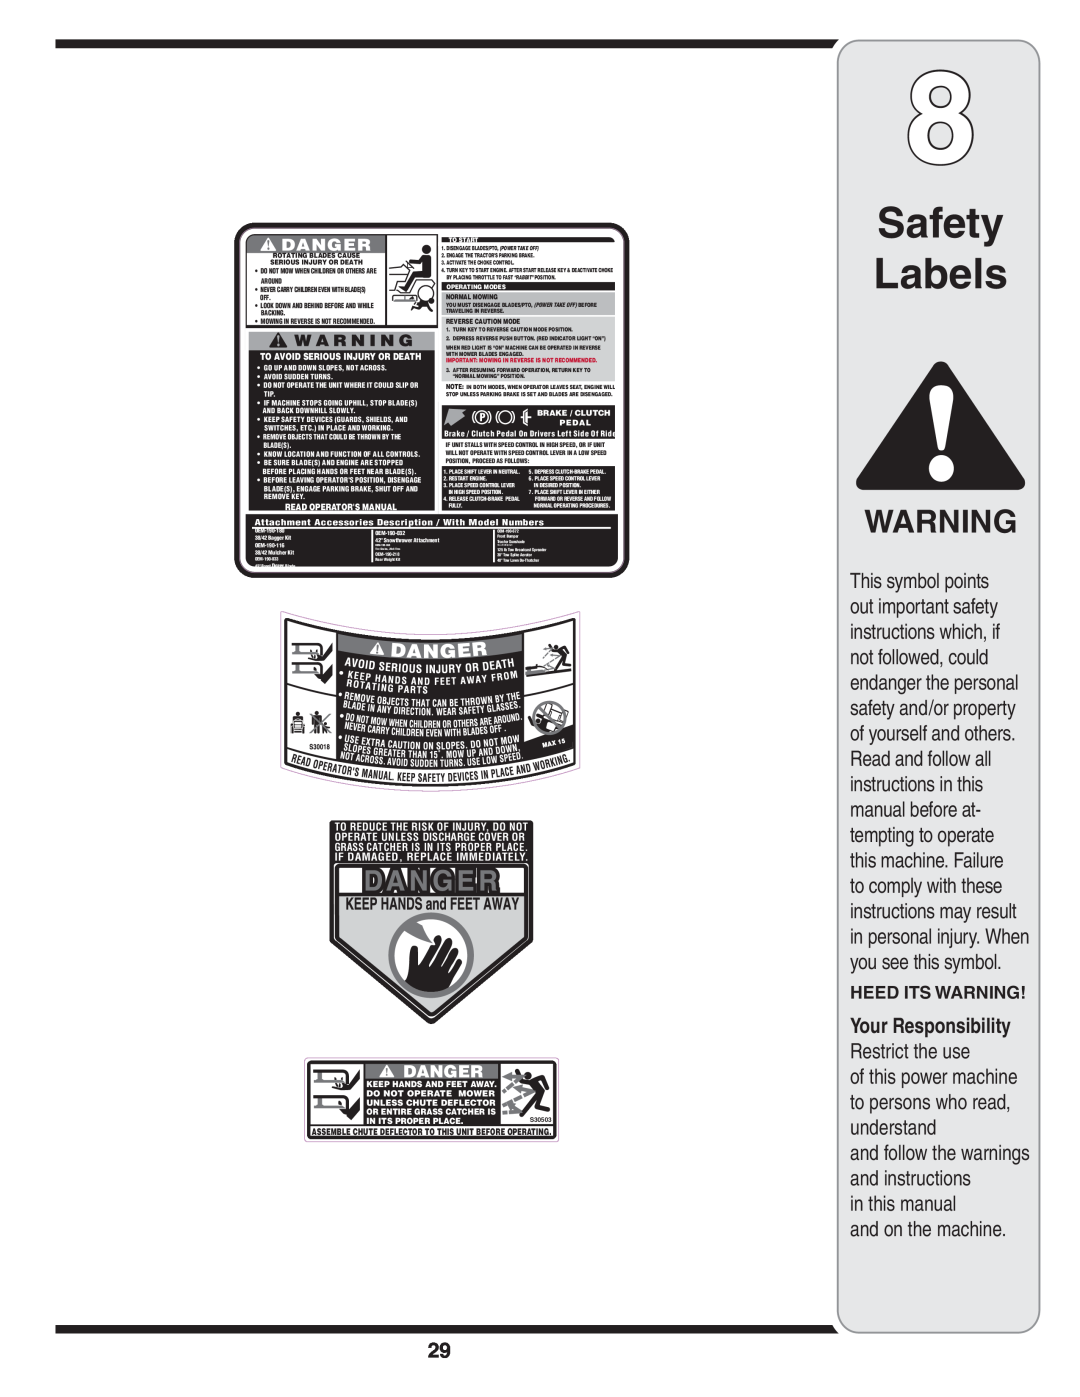 MTD 760, 779, 760-779 warranty Safety Labels, in this manual and on the machine 